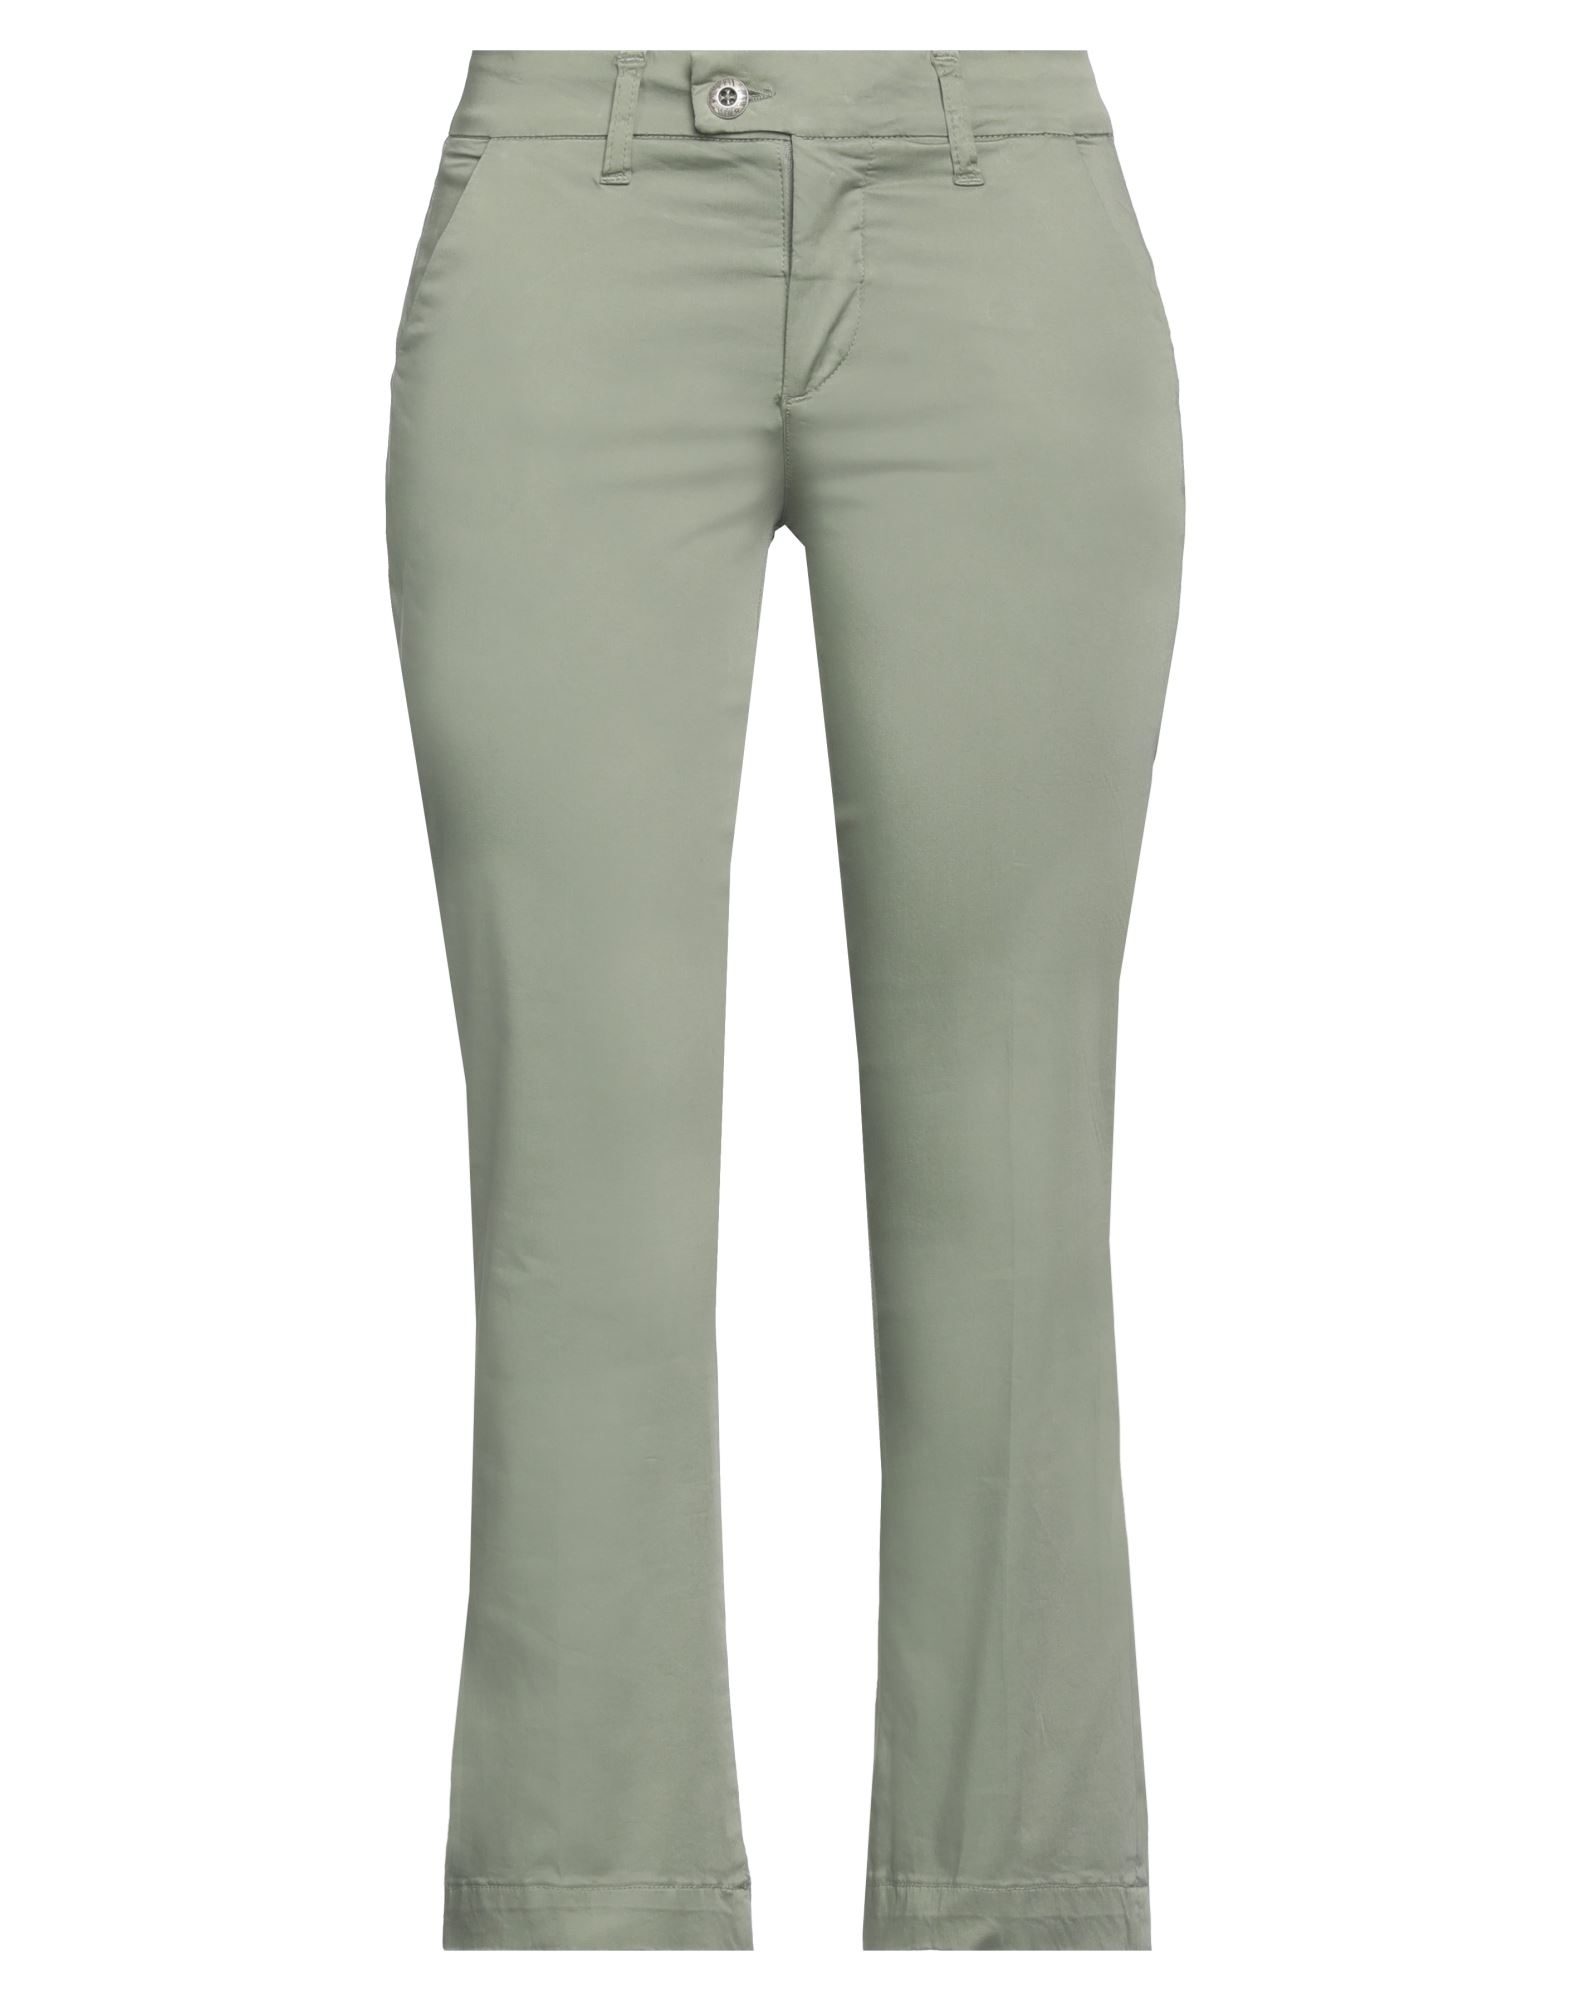 Noir And Bleu Cropped Pants In Sage Green